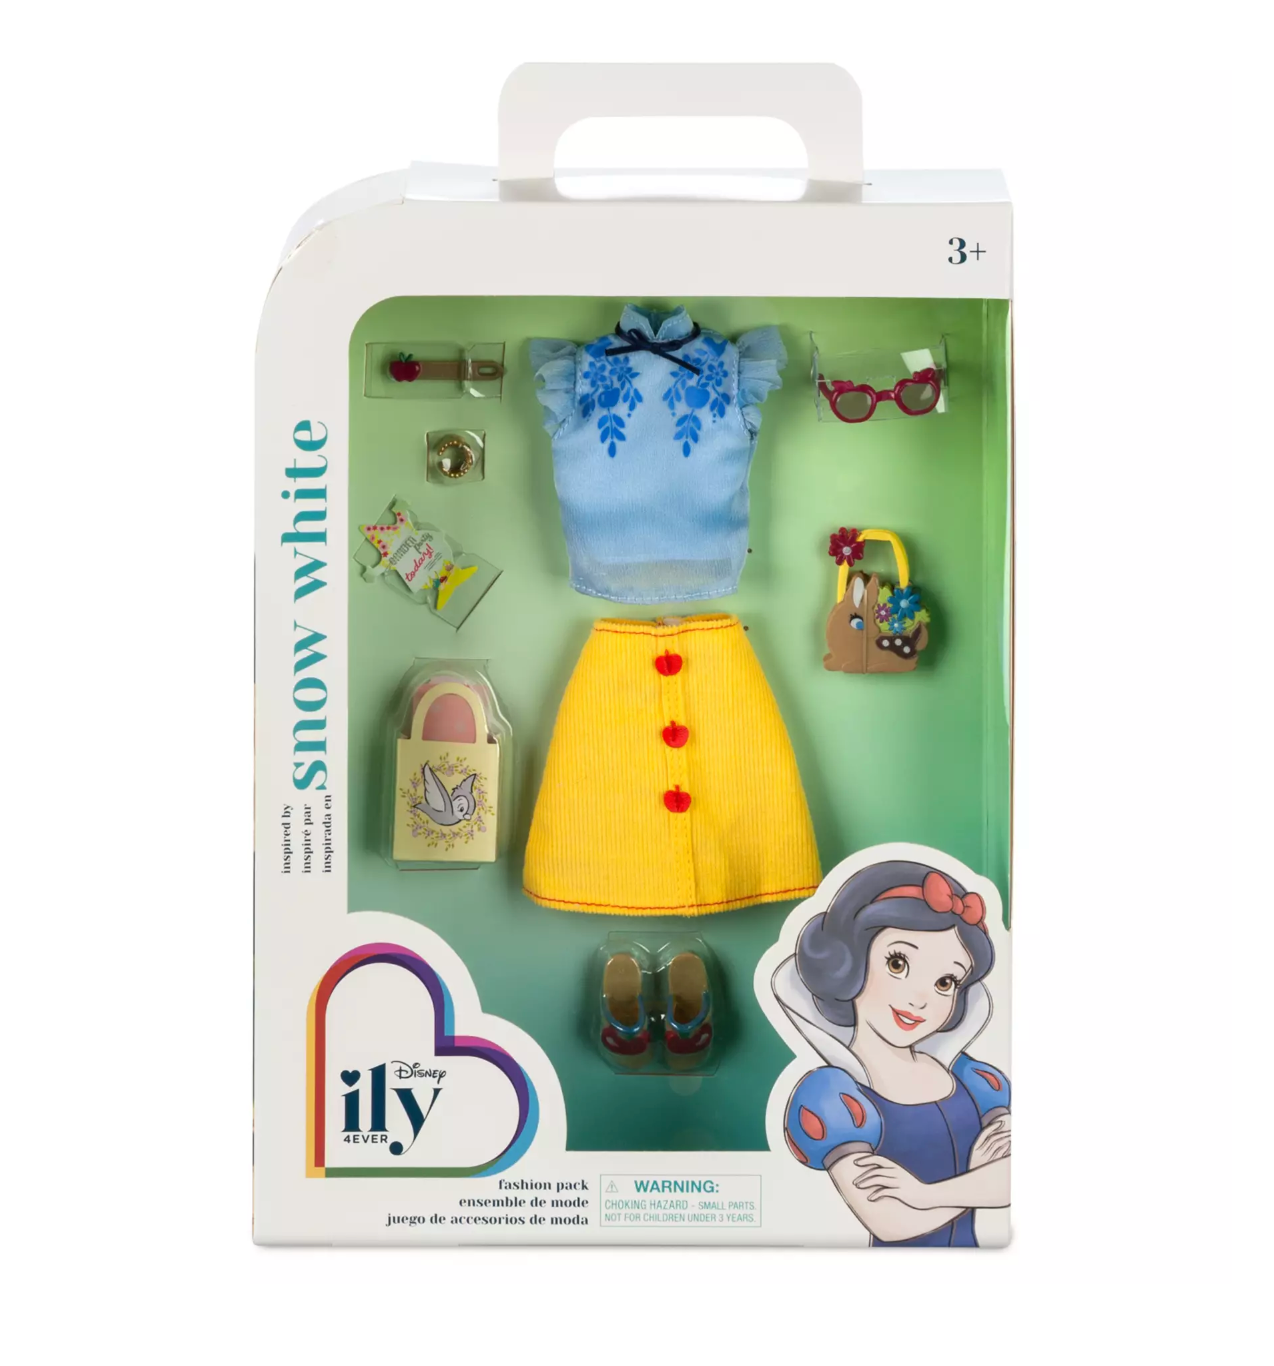 Disney ily 4EVER Fashion Pack Inspired by Snow White New with Box